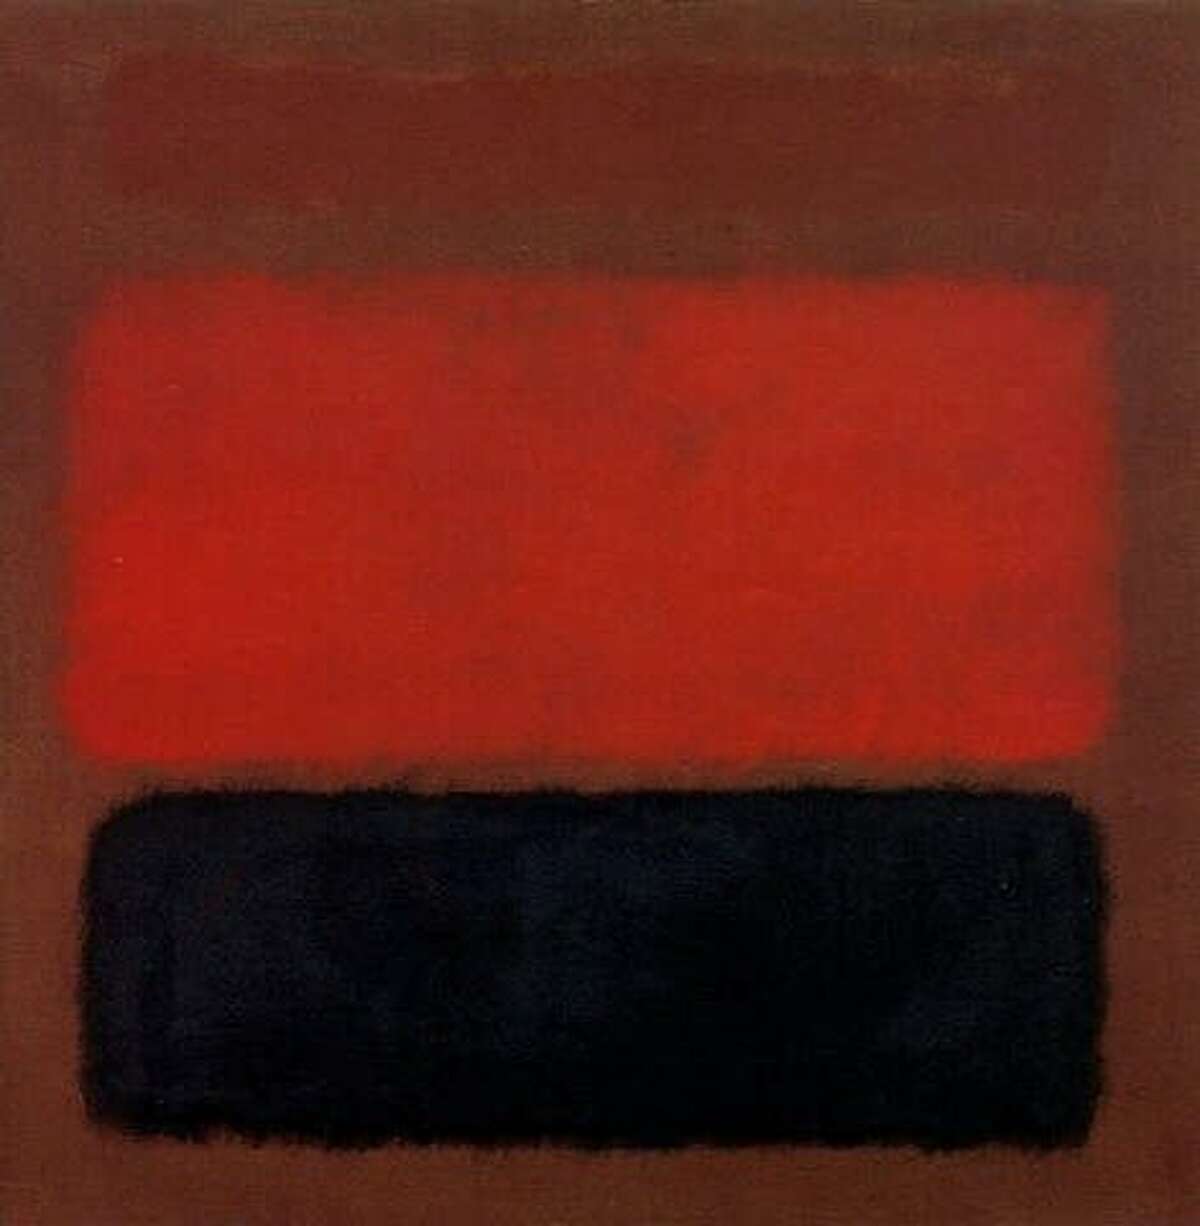 Mark Rothko, No. 19, 1960, oil on canvas, 69 x 69 1/4 inches. Private Collection.